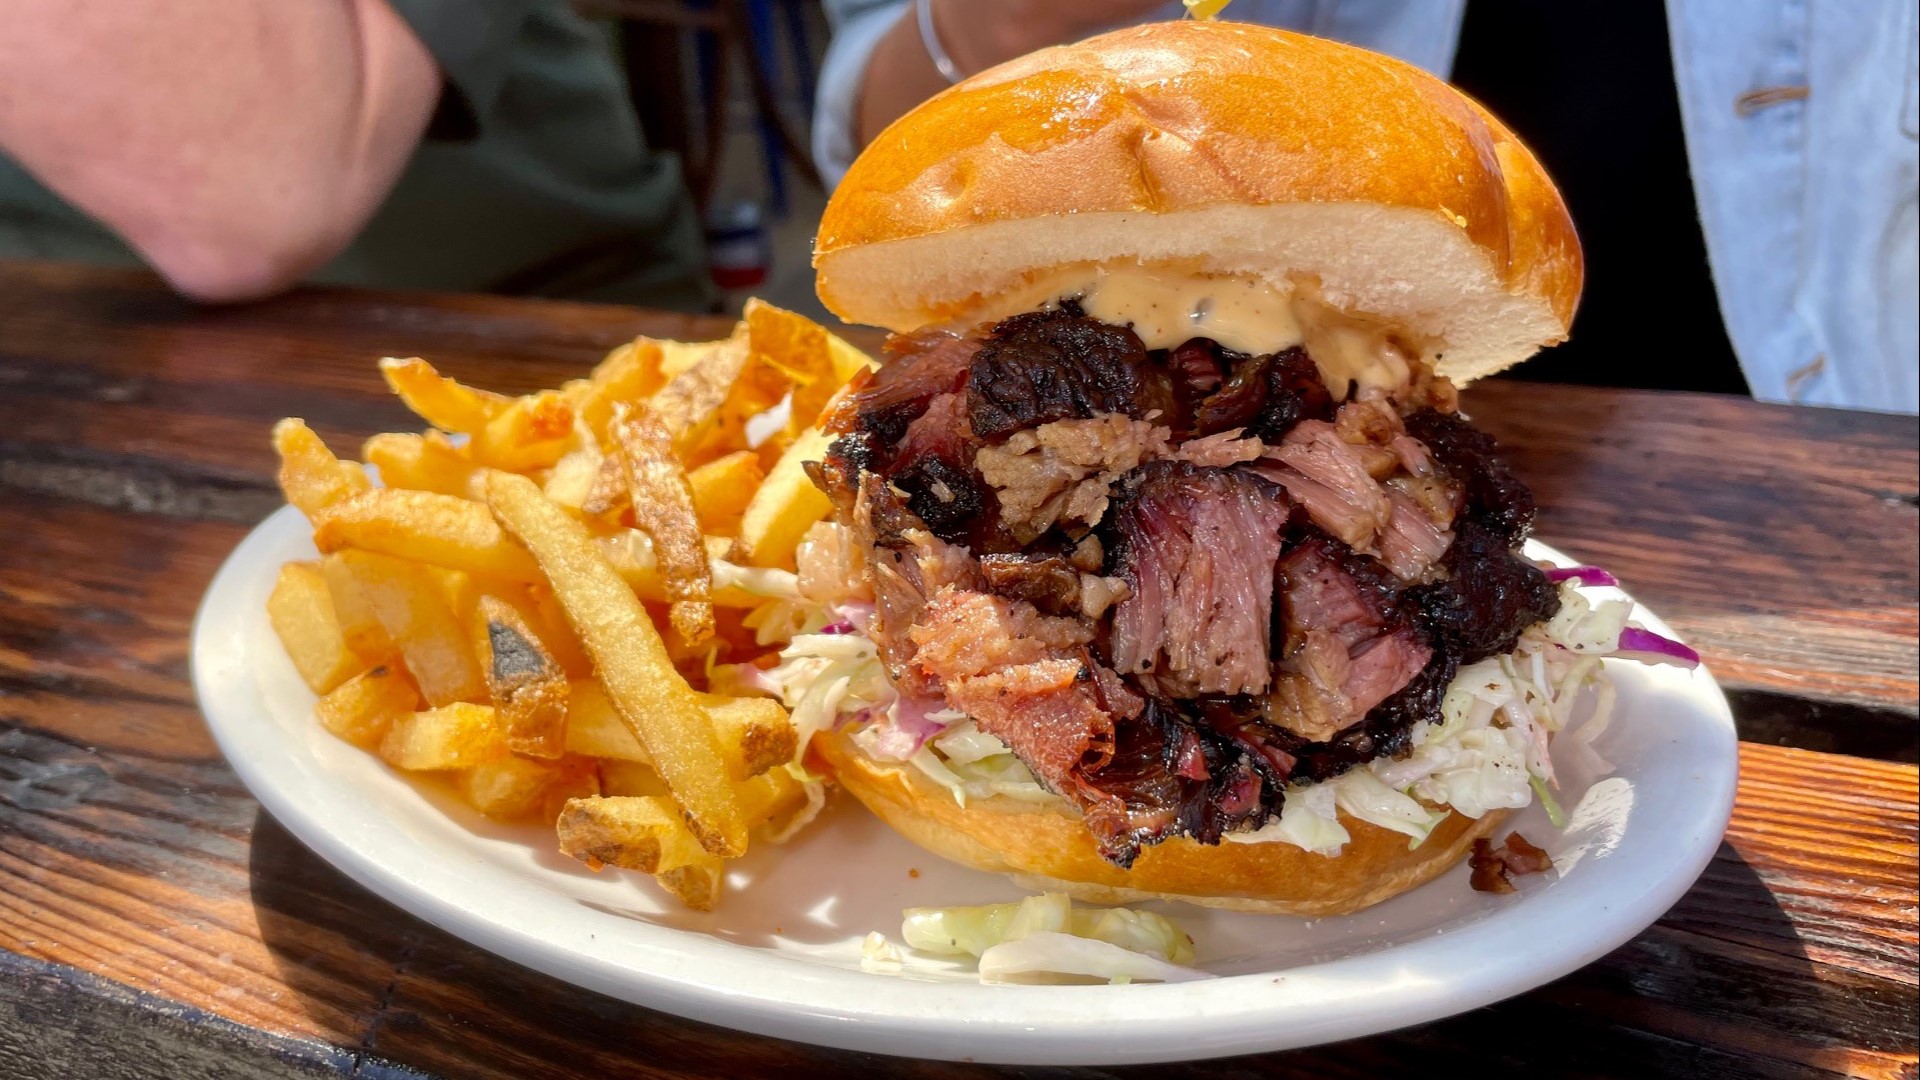 Drunky Two Shoe Barbecue serves up Texas barbecue so good, you won't even need sauce. #k5evening